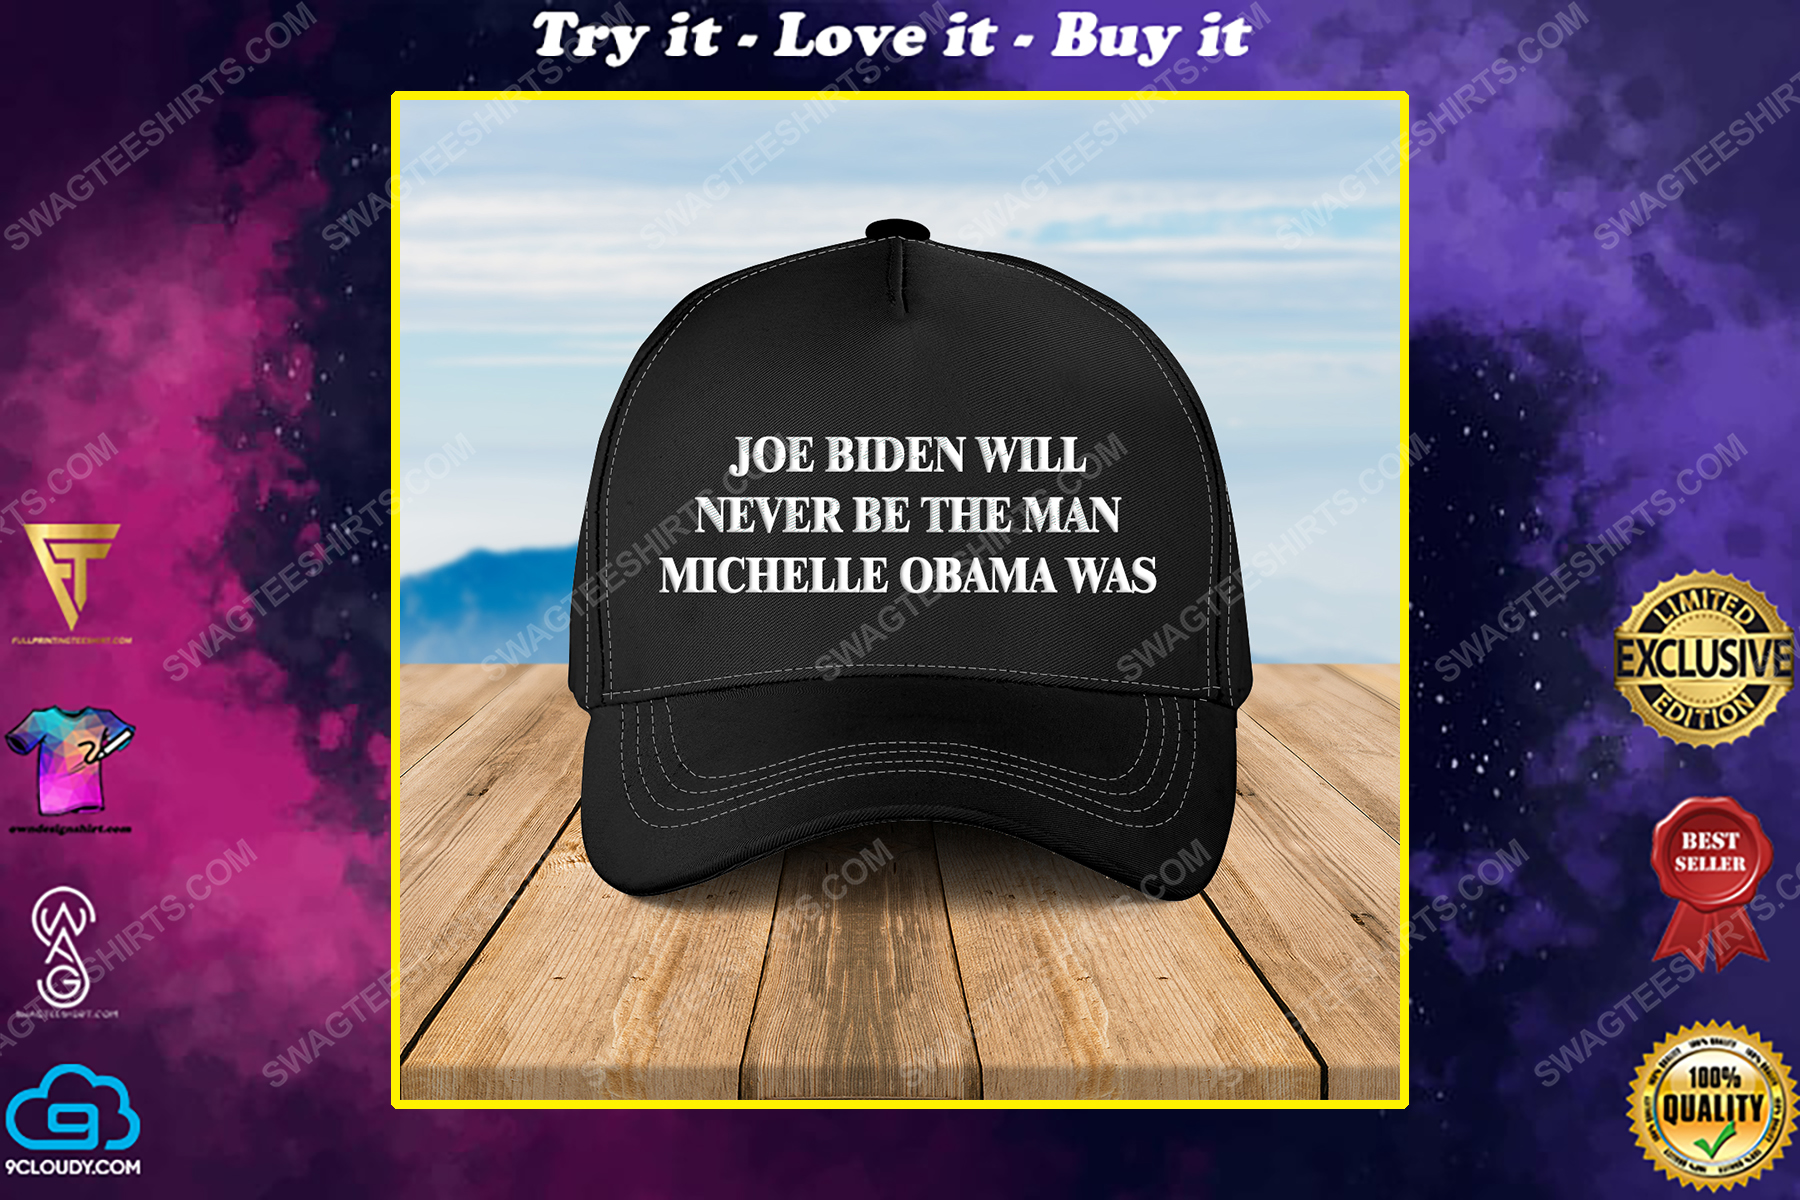 Joe biden will never be the man michelle obama was full print classic hat